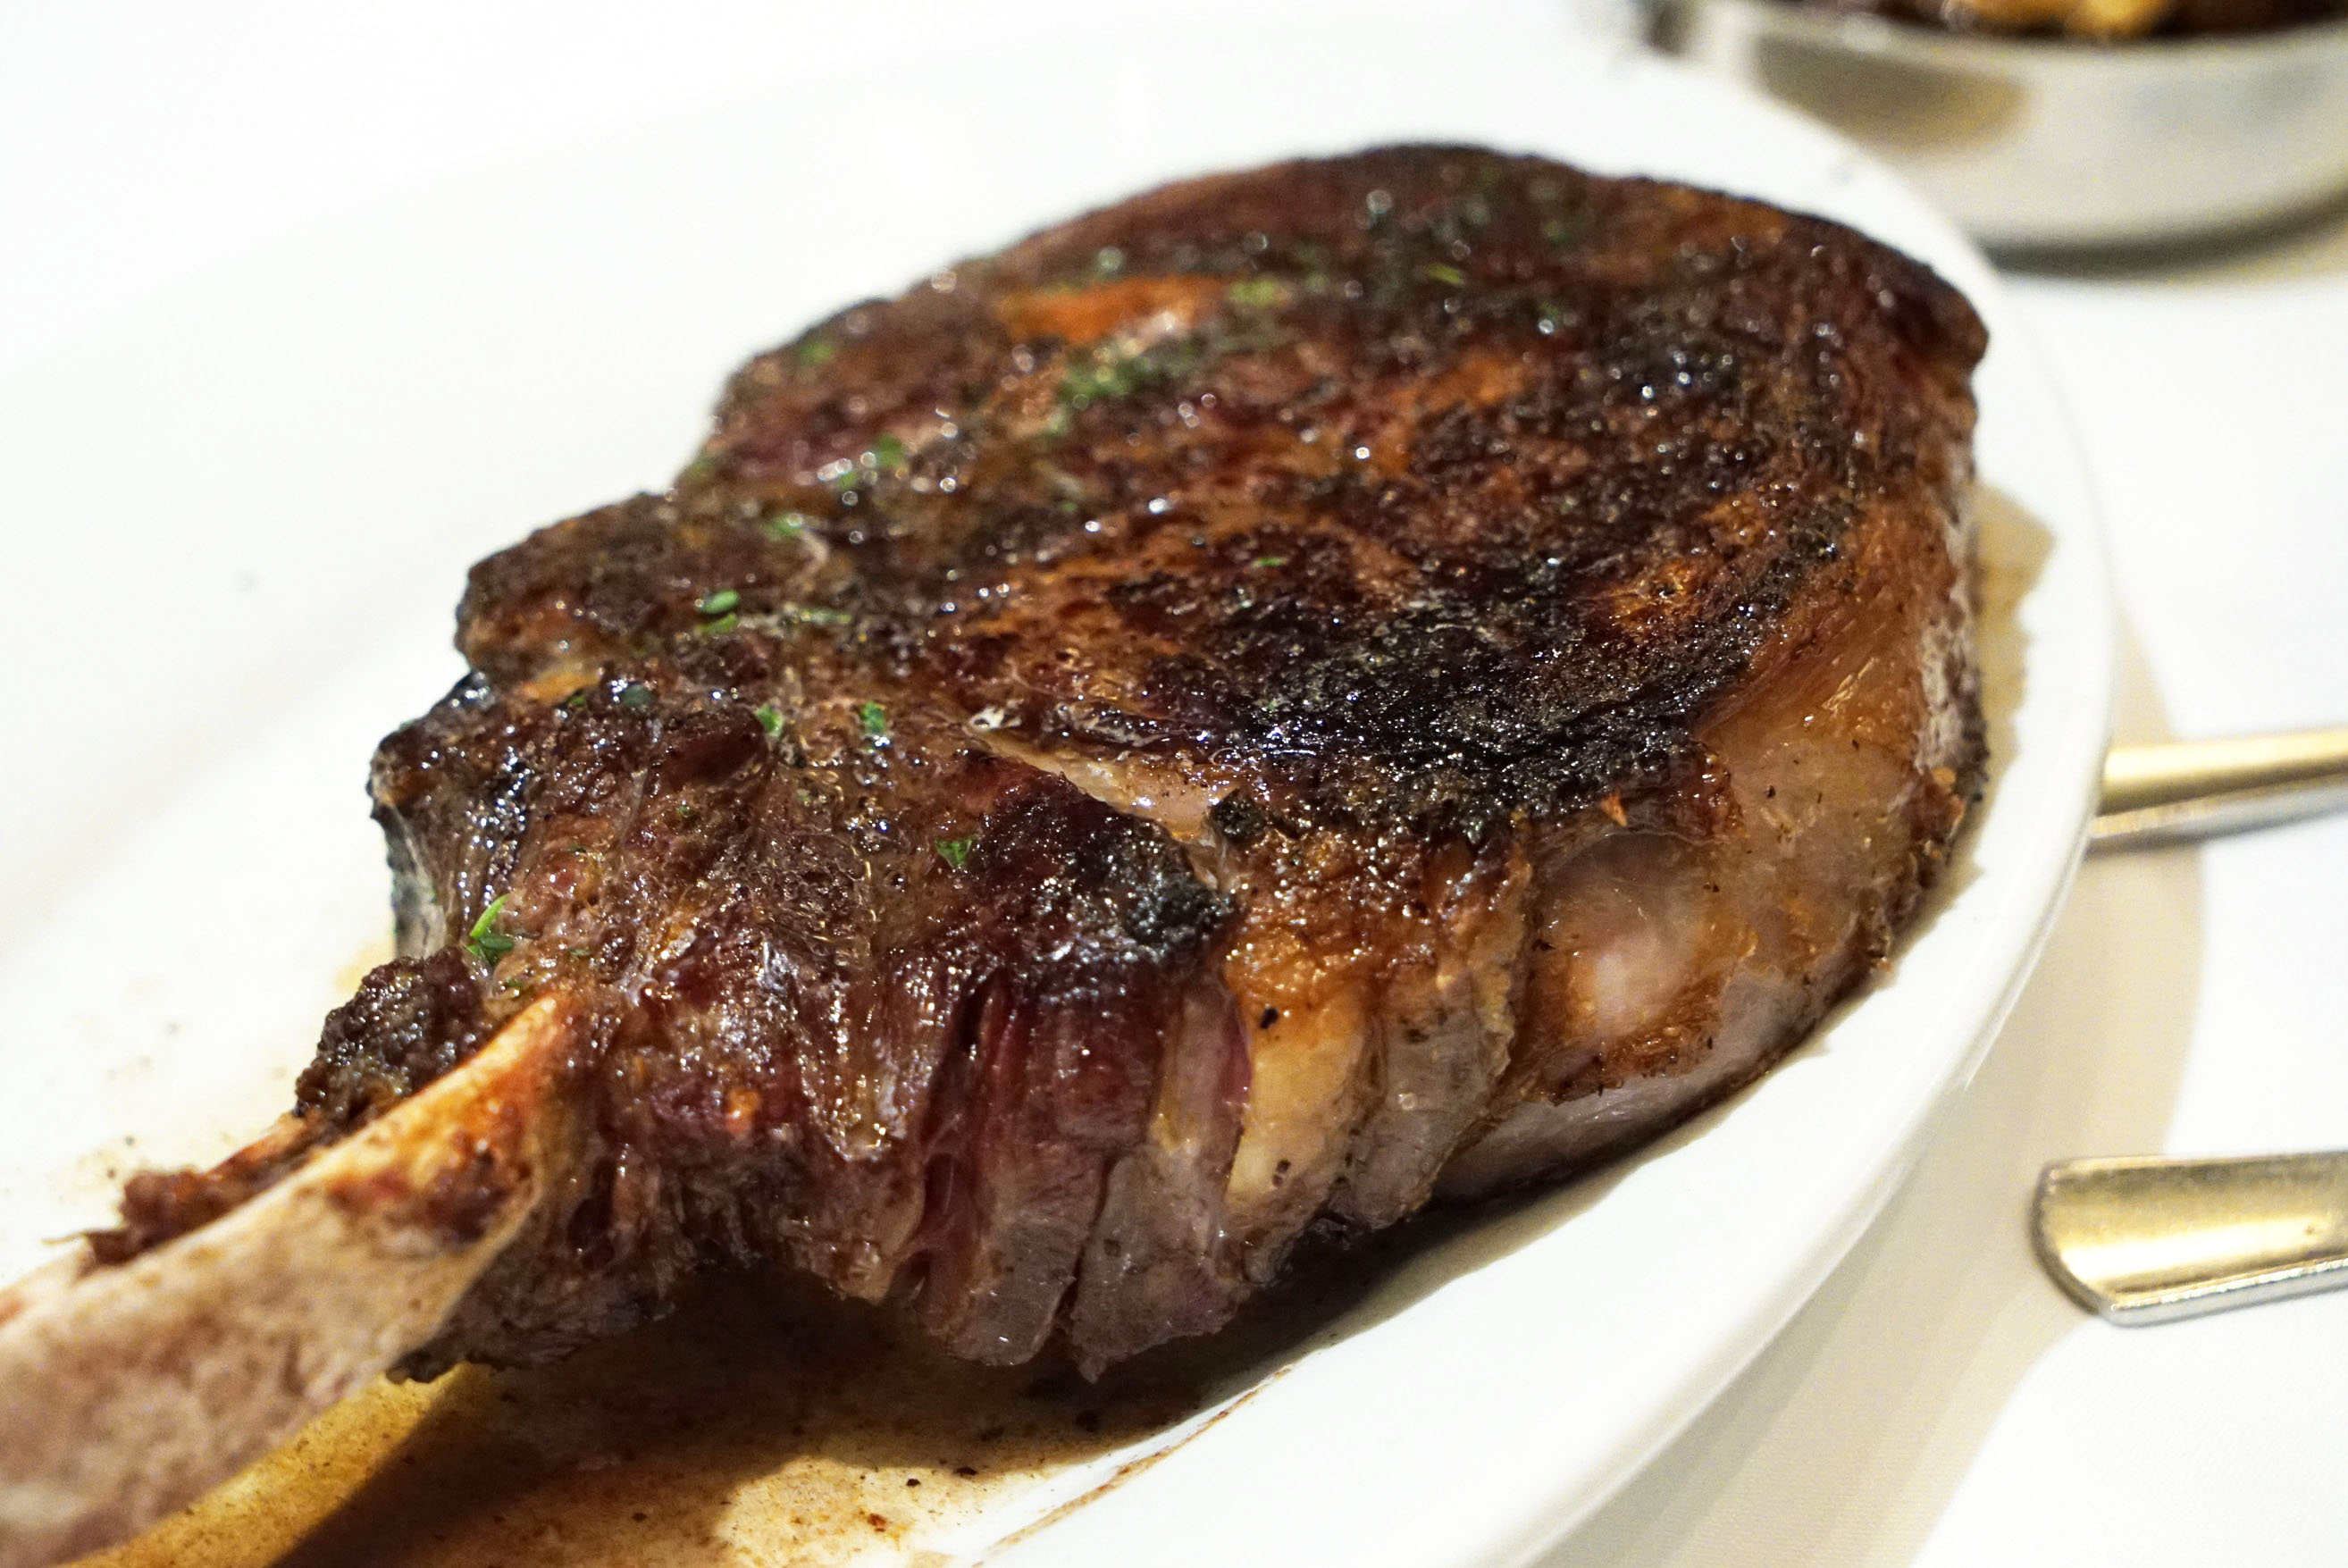 How To Cook A Steak Like Ruth Chris Steakhouse